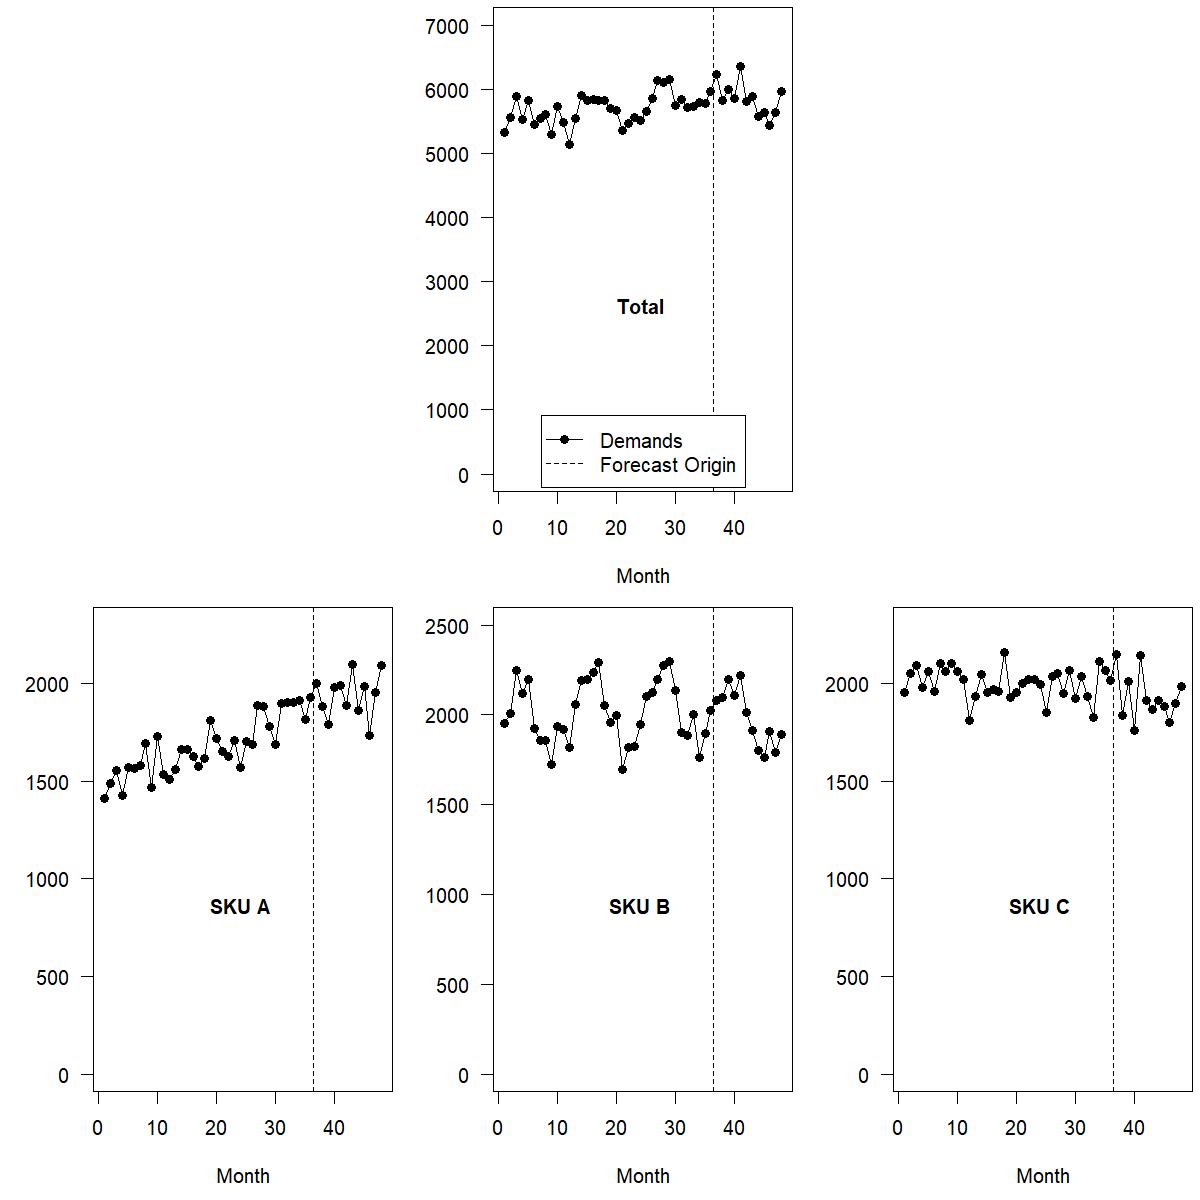 Four panels of time series, one on top, three at the bottom. Each panel's horizontal axis is labeled "Month" and goes from 1 to 50. The vertical axes go from 0 to 2500 for the three panels at the bottom, and from 0 to 7000 for the panel at the top. In each case, a dotted vertical line at moonth 36 indicates the forecast origin. The bottom left panel is labeled "SKU A" and shows a time series with an upward trend. The bottom center panel is labeled "SKU B" and shows a time series with yearly seasonality. The bottom right panel is labeled "SKU C" and shows a time series fluctuating around a mean with no structure. The top panel is labeled "Total" and shows a time series that is the sum of the time series shown in the bottom panels.